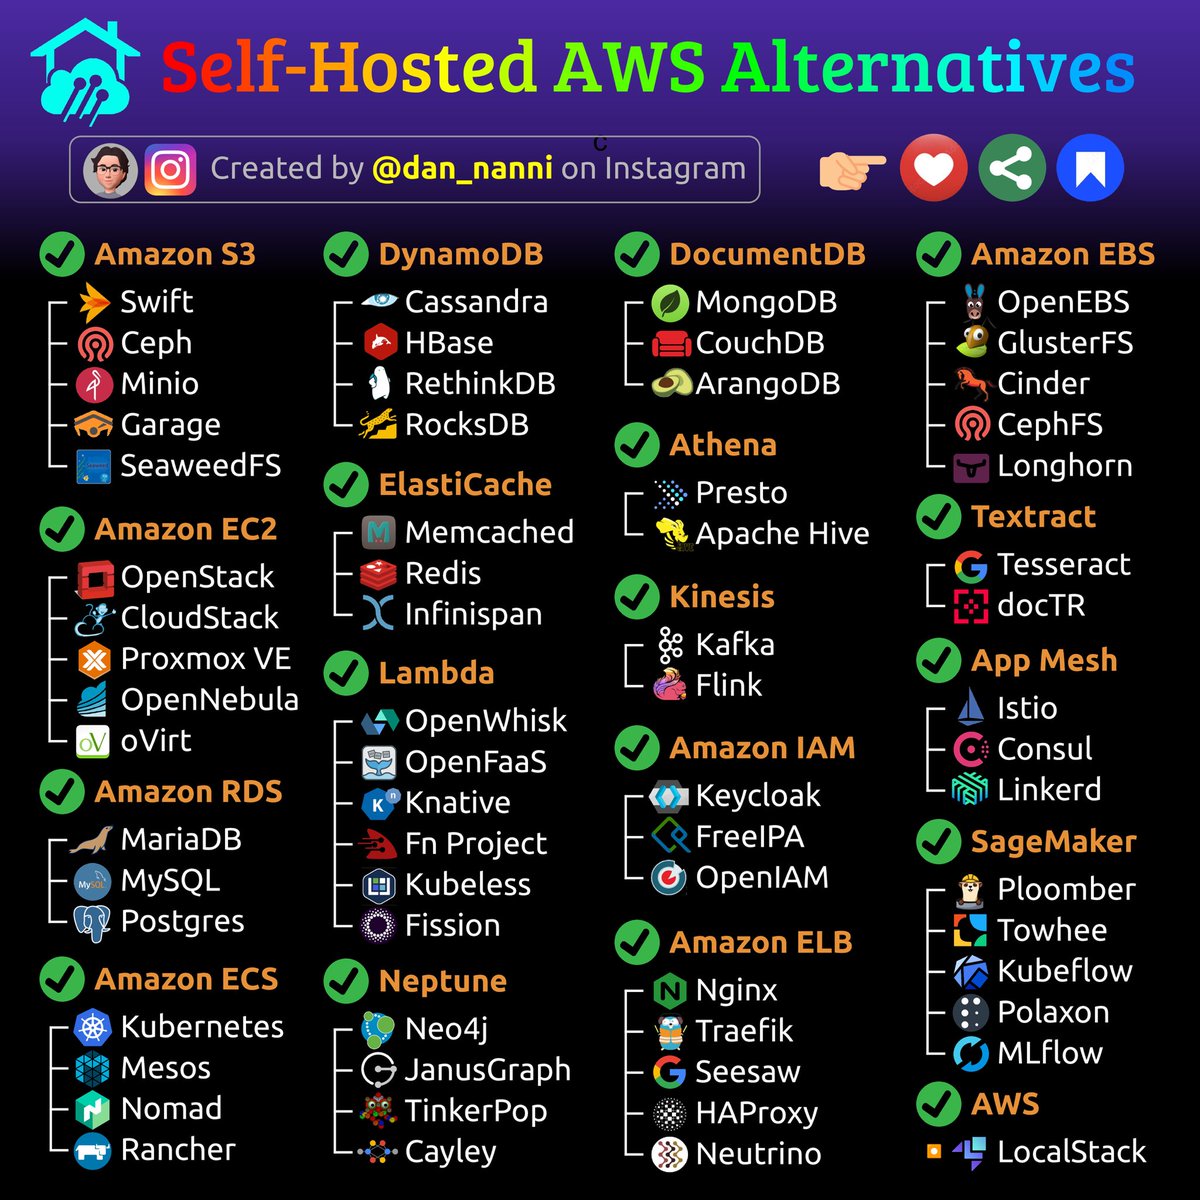 Self-hosted alternatives to commercial AWS products 😎👇
#aws #cloudcomputing #cloudservices #selfhosting